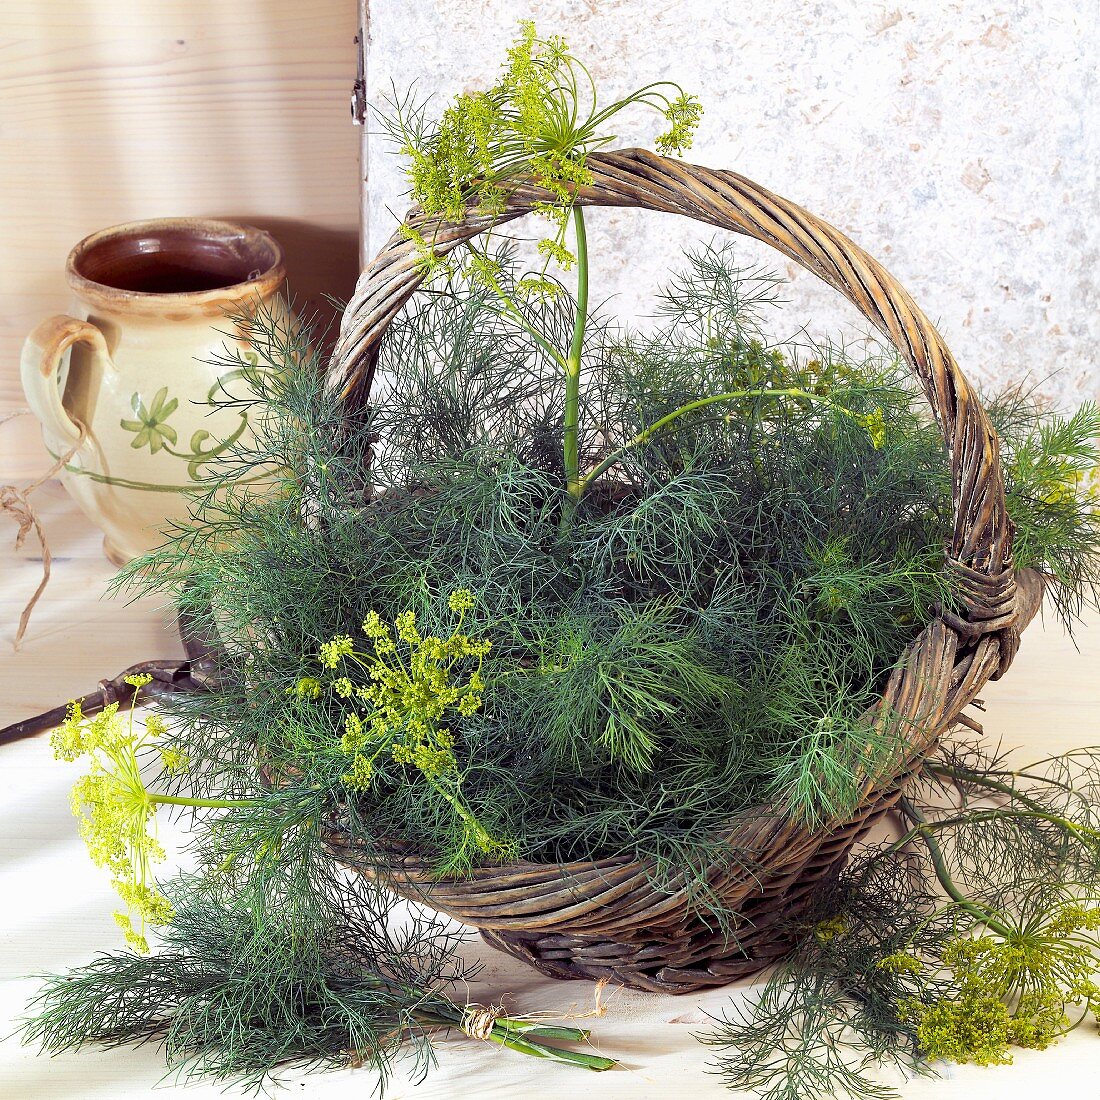 Dill in a basket